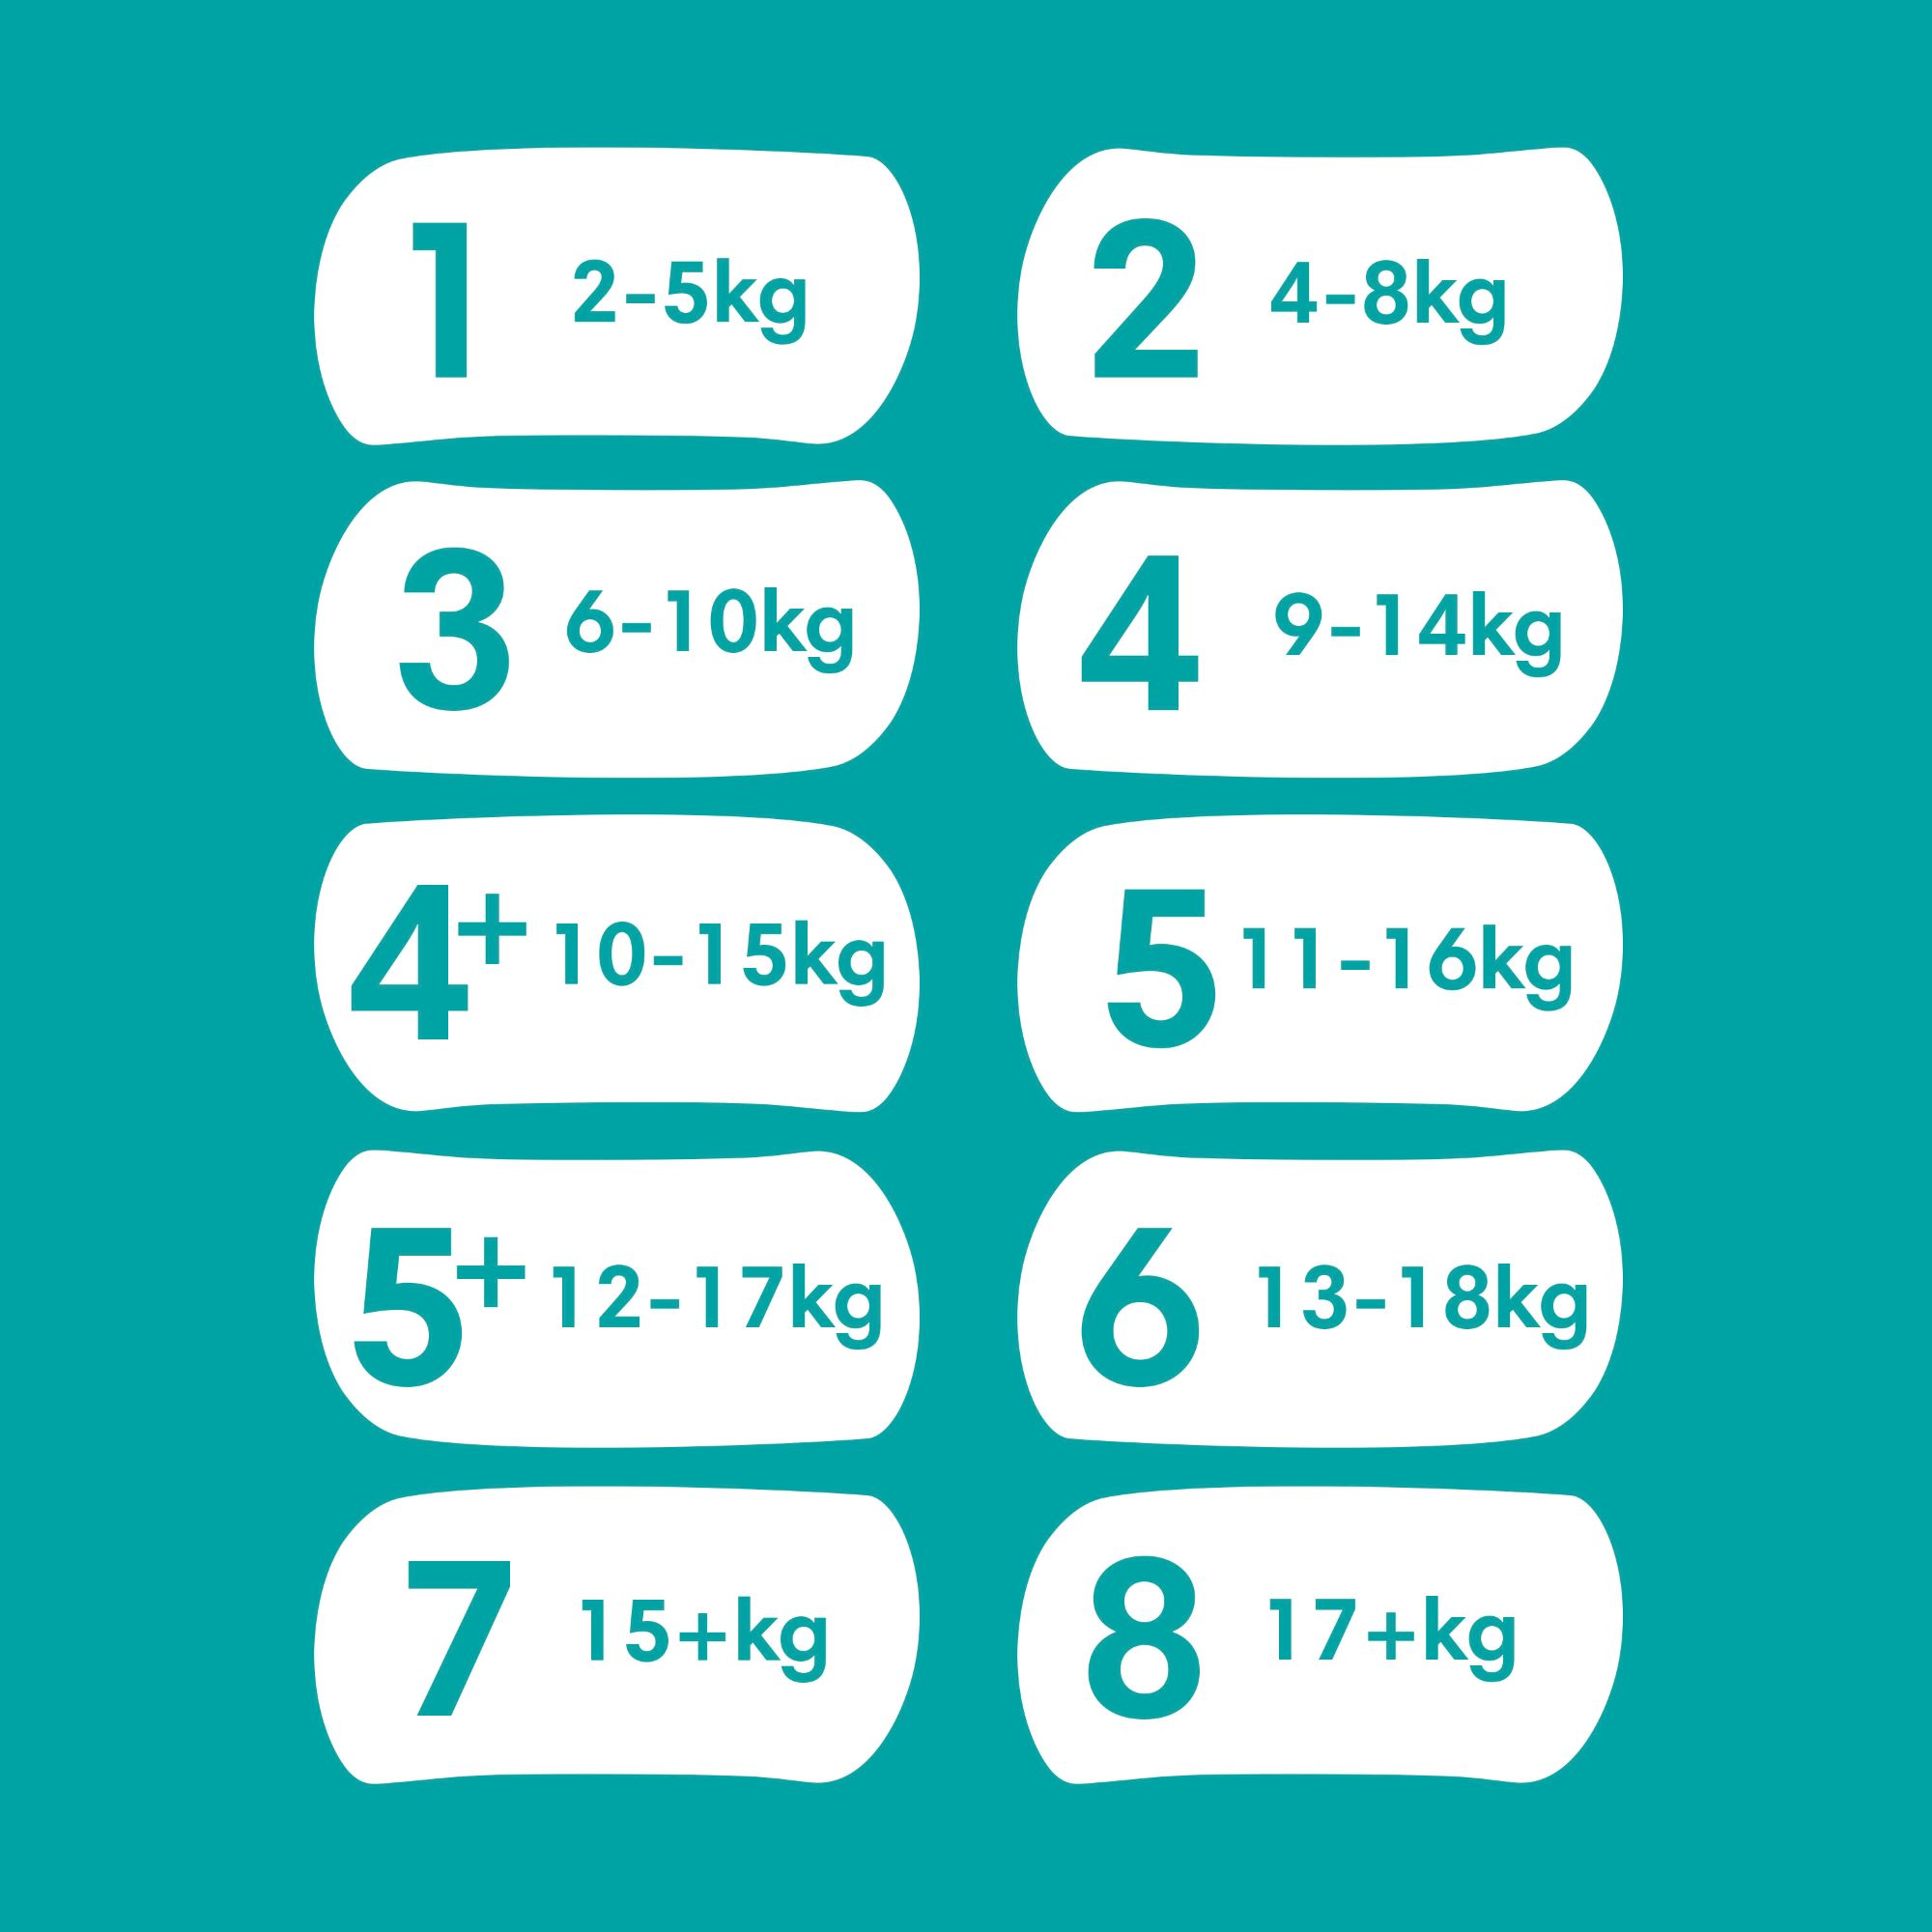 Pampers Baby-Dry Gr.6 Extra Large 13-18kg (148 STK) Monatsbox